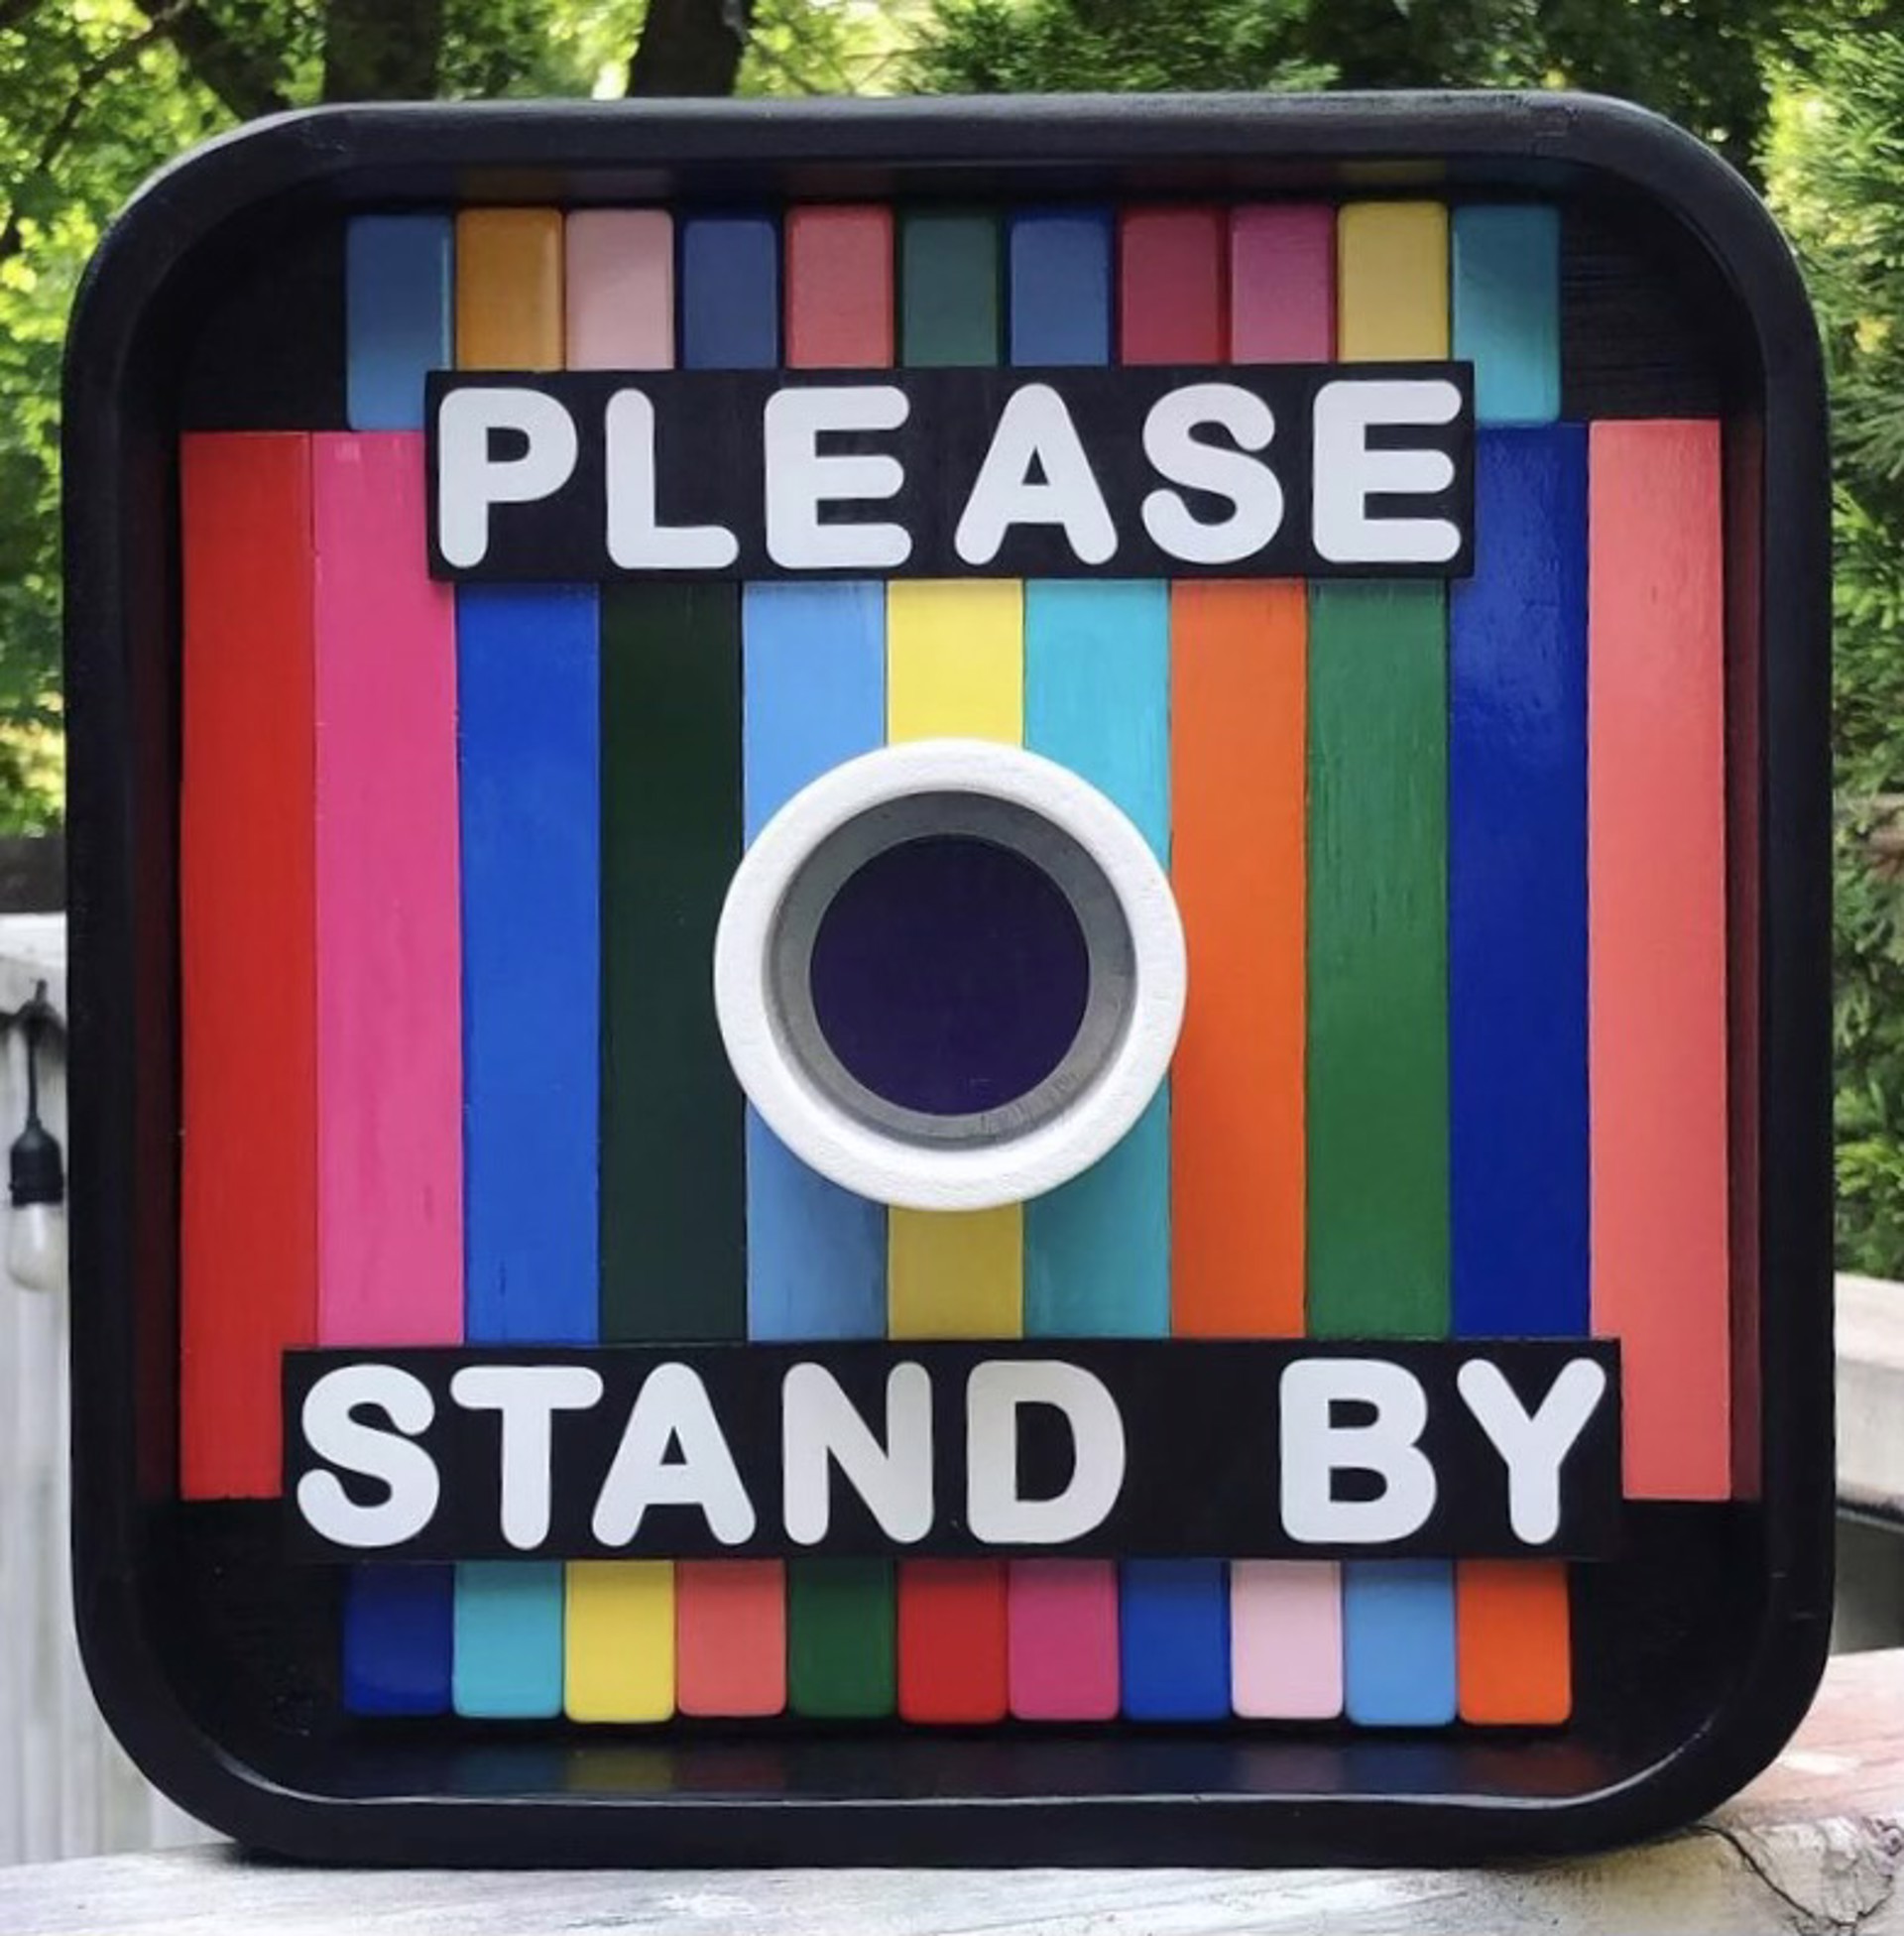 Please Stand By by Joel Reines